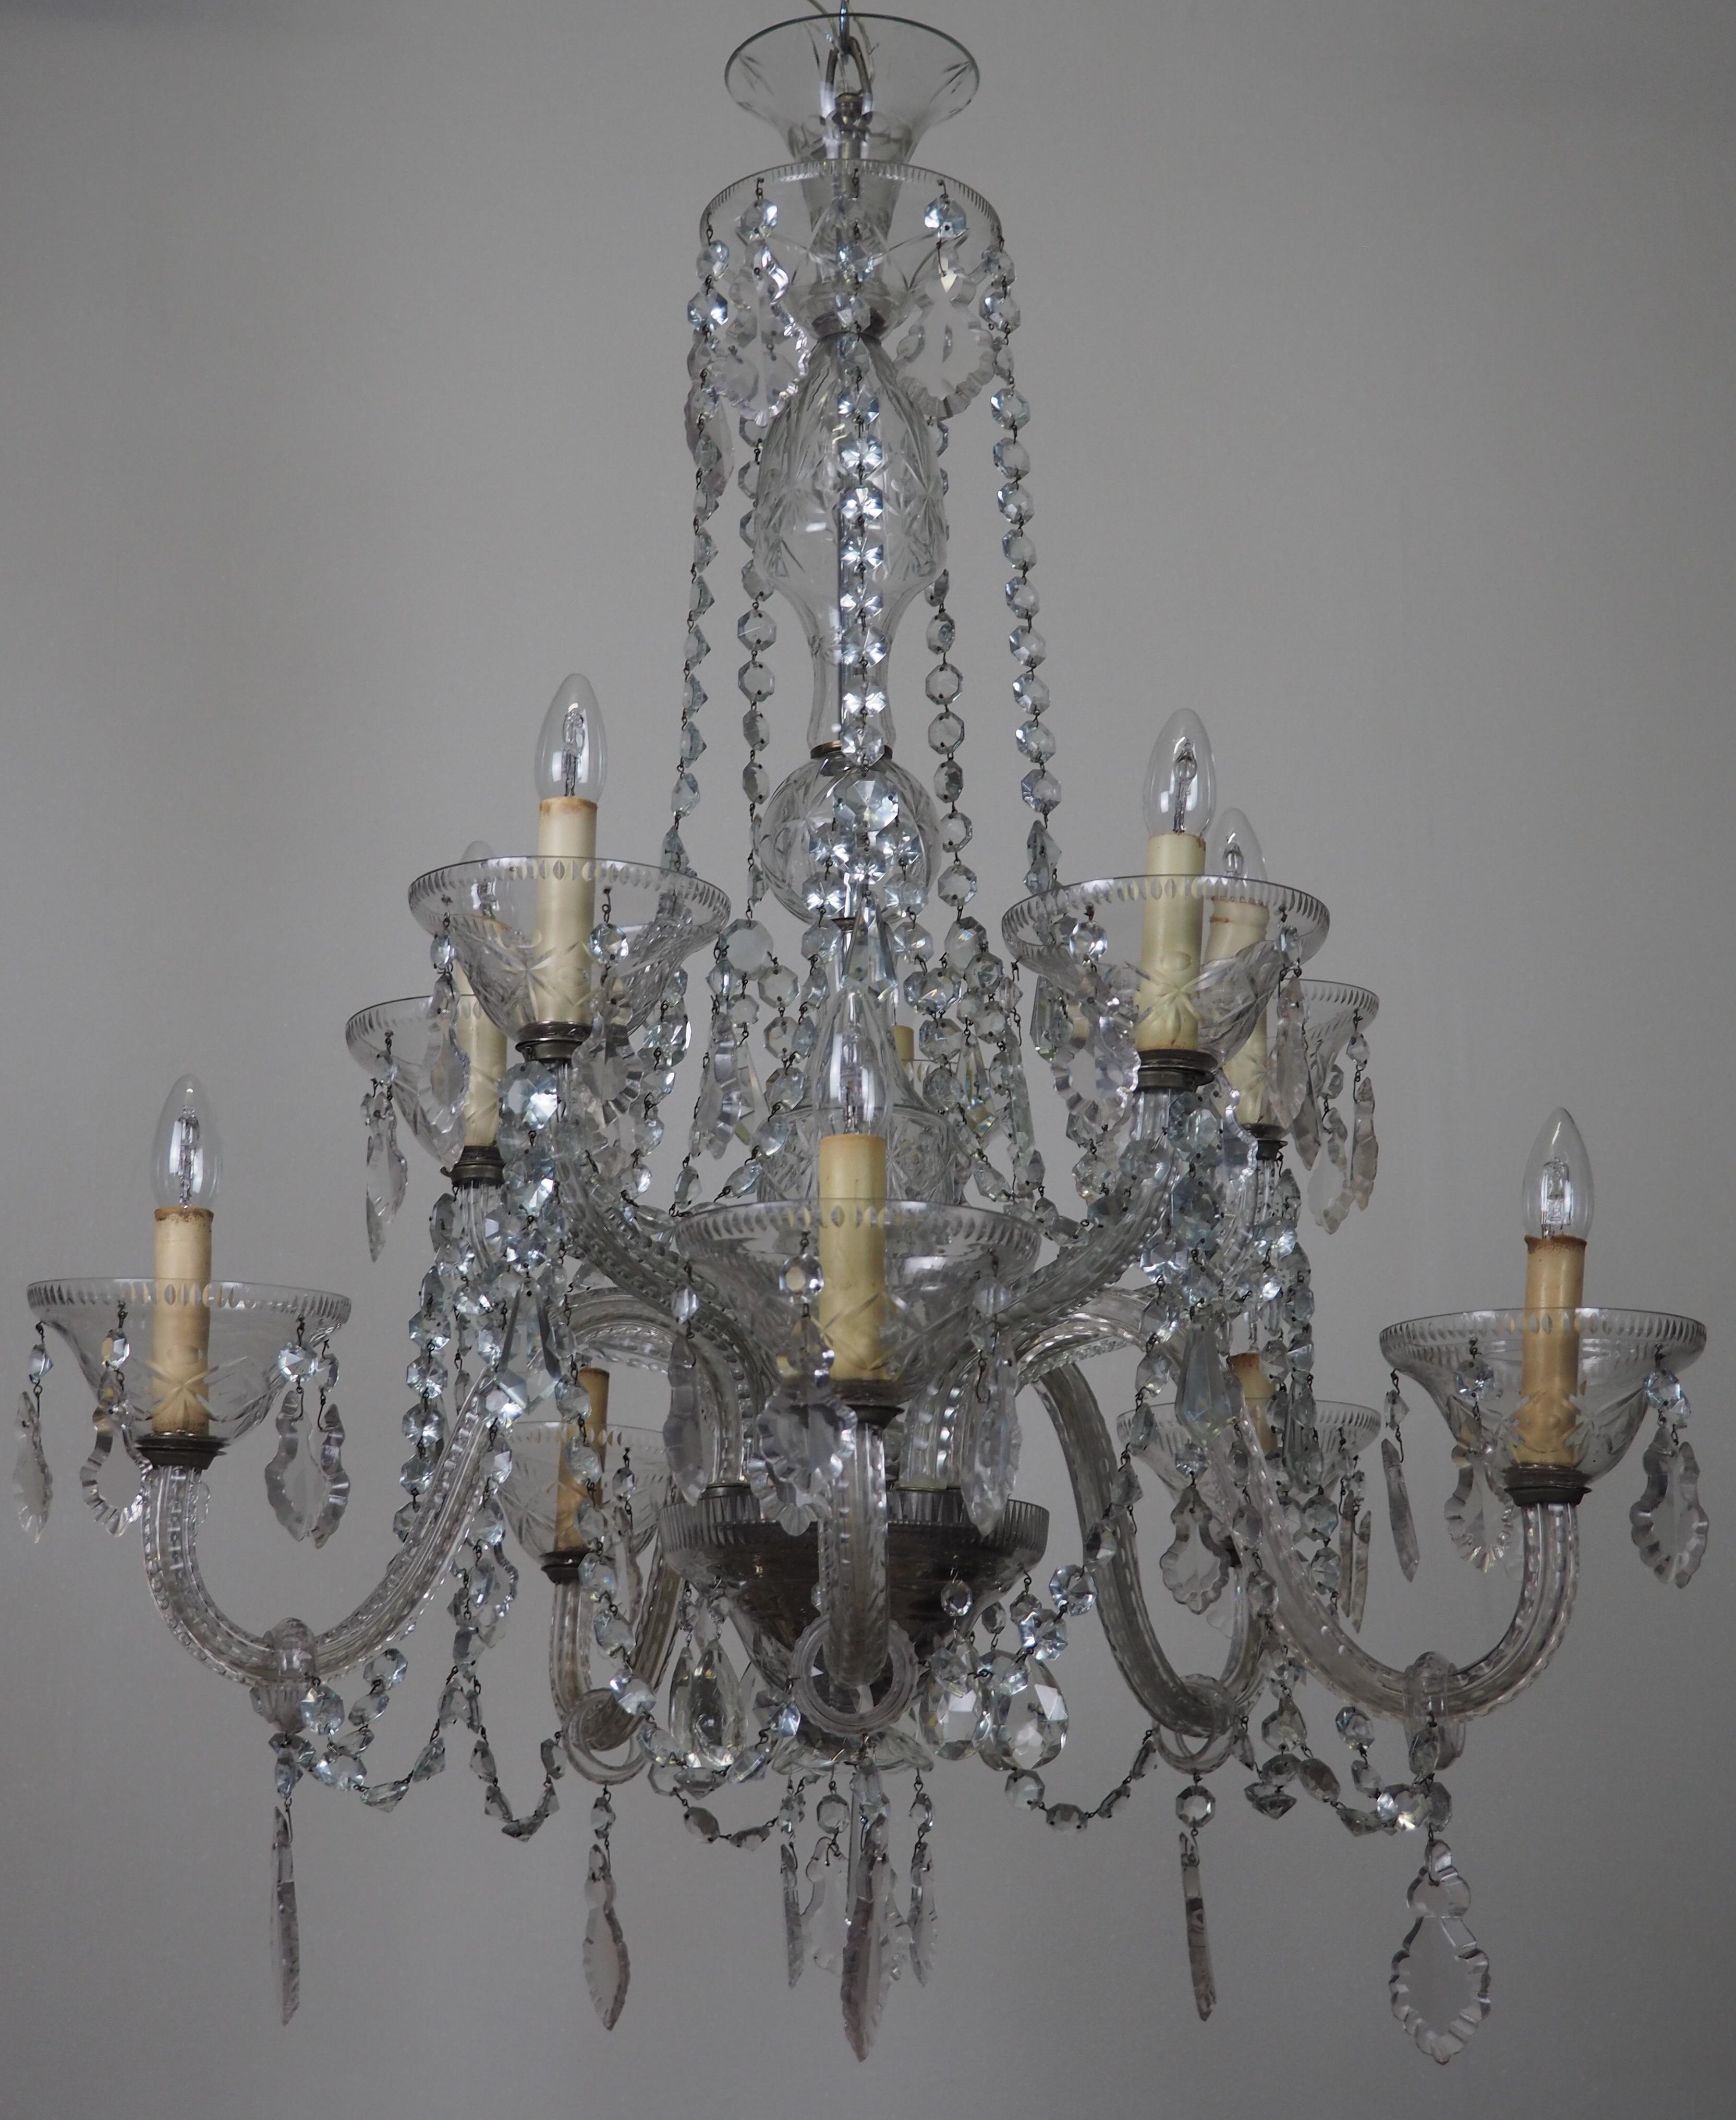 A wonderful large ten-light Murano glass and cut crystal silvered chandelier, Italy, circa 1920s.
This beautiful handcrafted fixture is made of silvered brass elements, Murano glass and cut crystals and needs 10 x Edison (e14) for standard screw